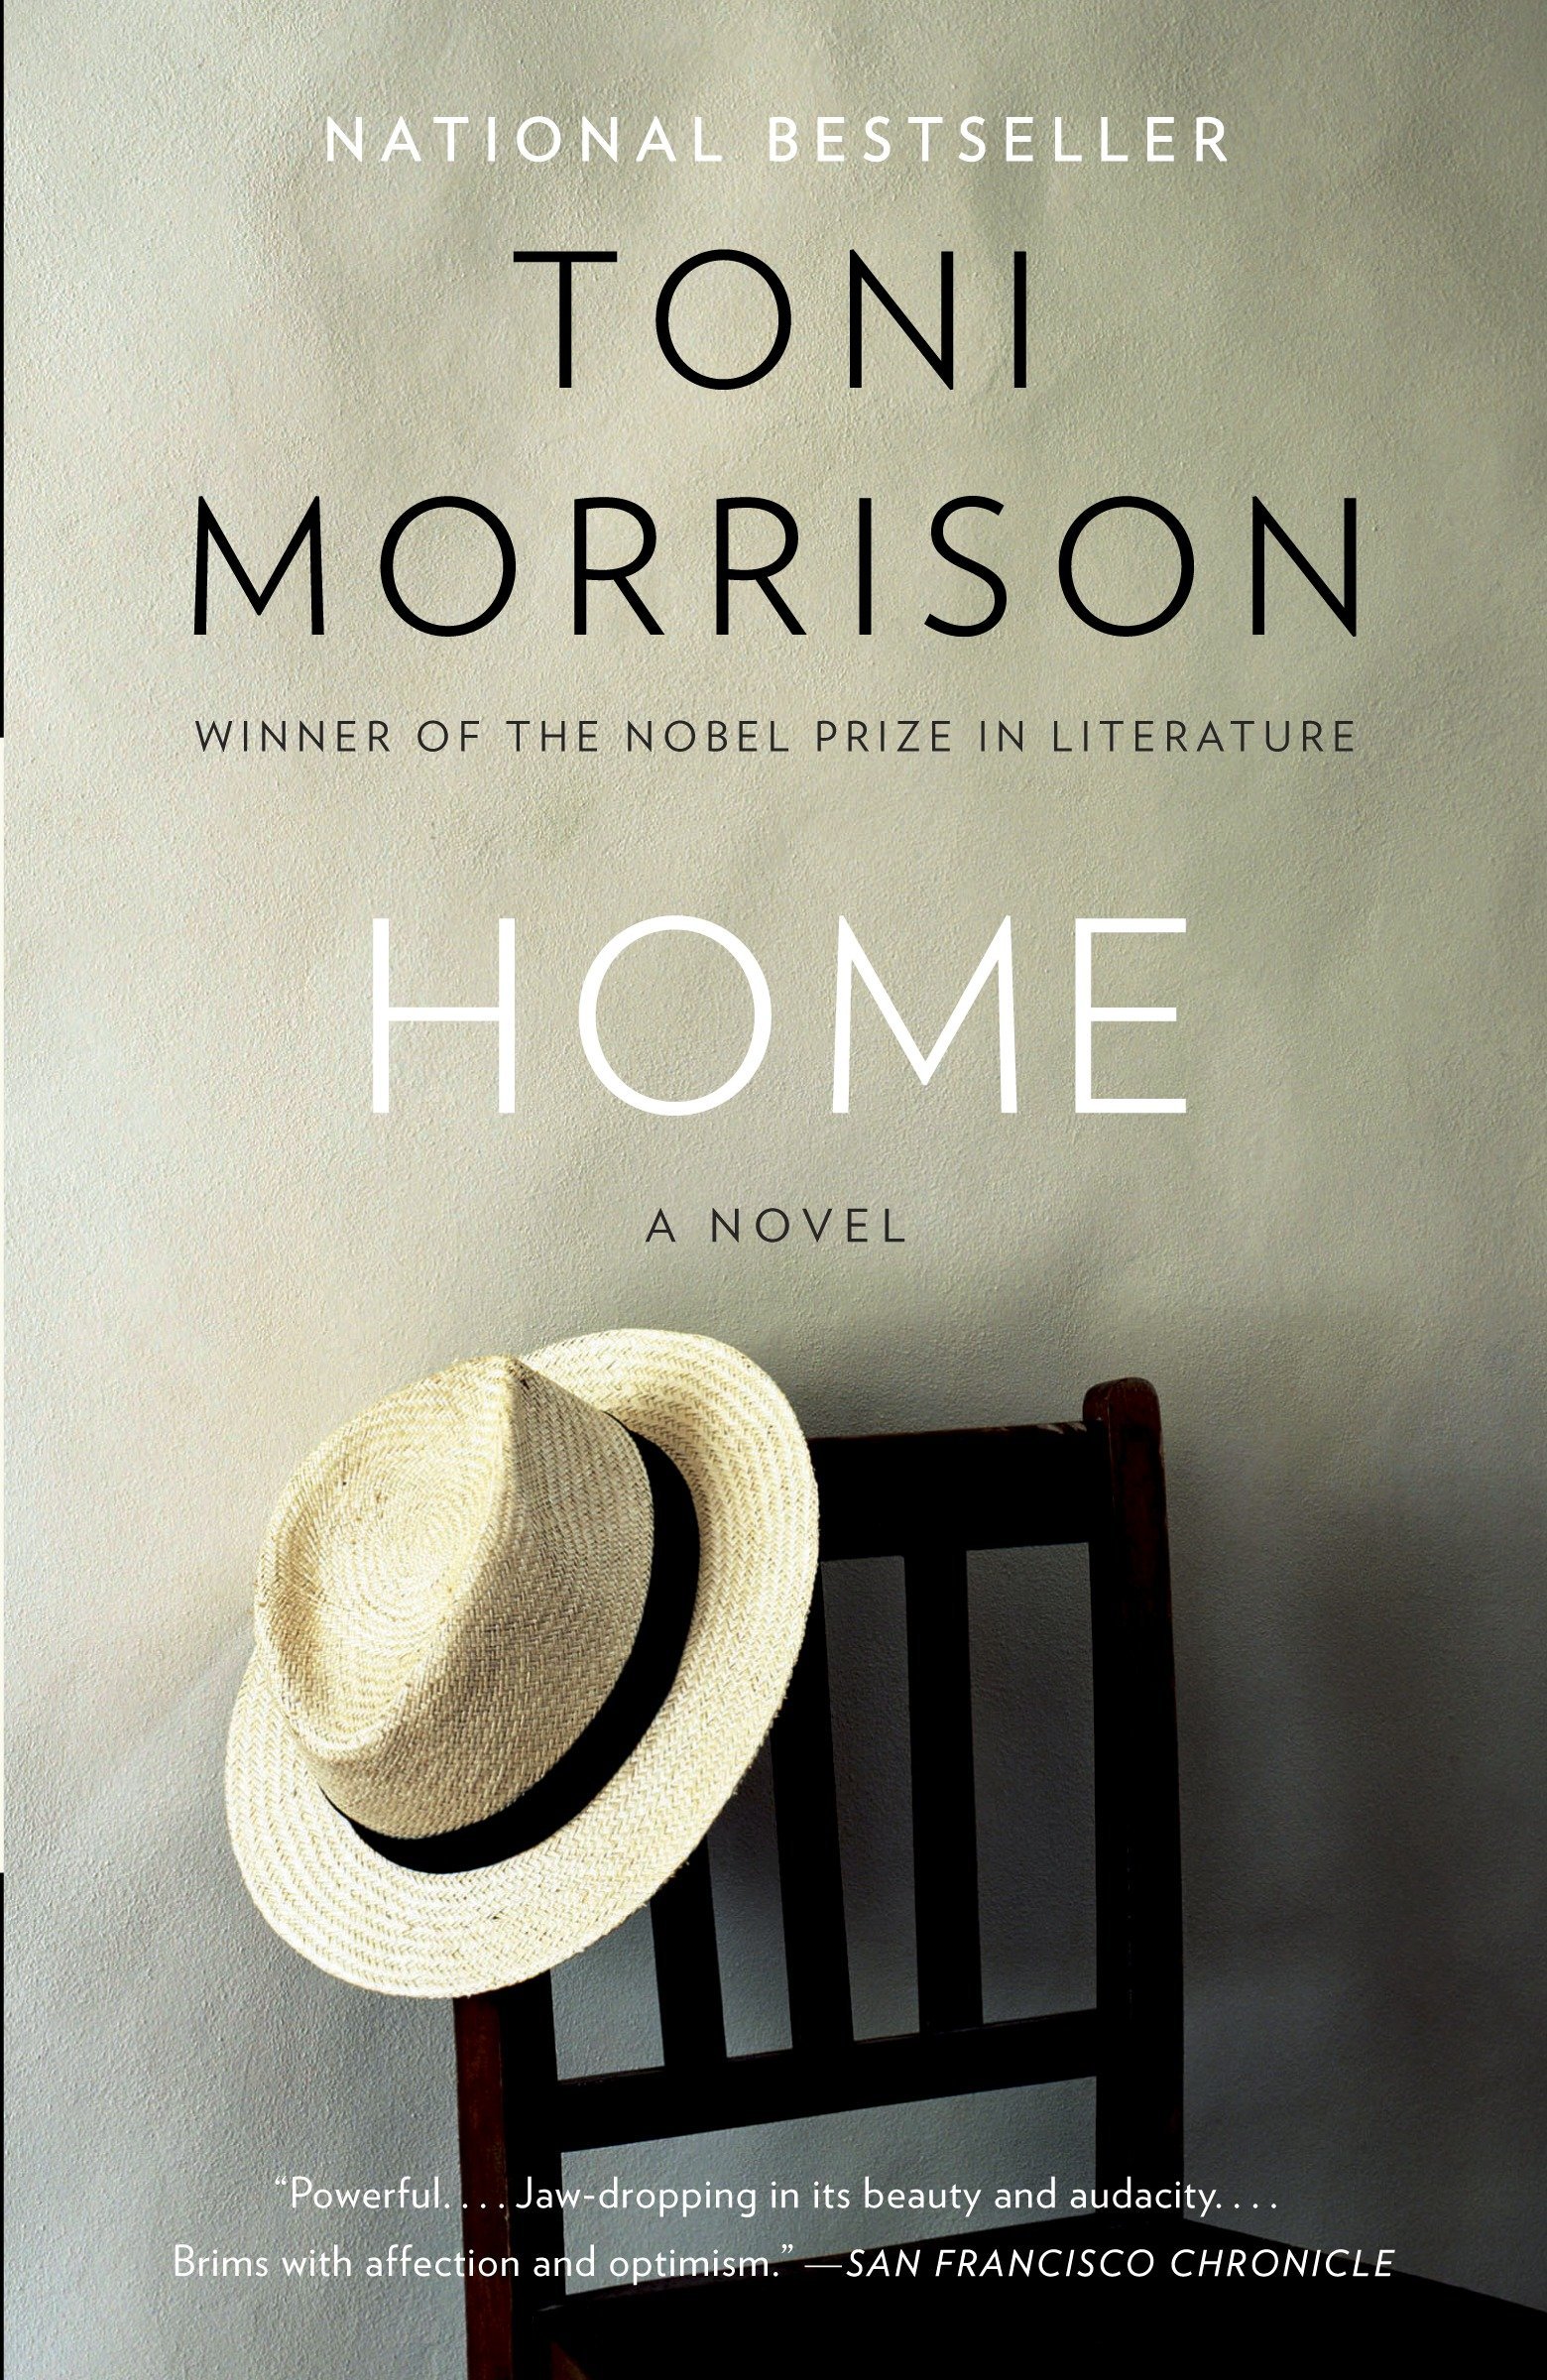 Book jacket of Toni Morrison's home showing a straw hat on a wooden chair.